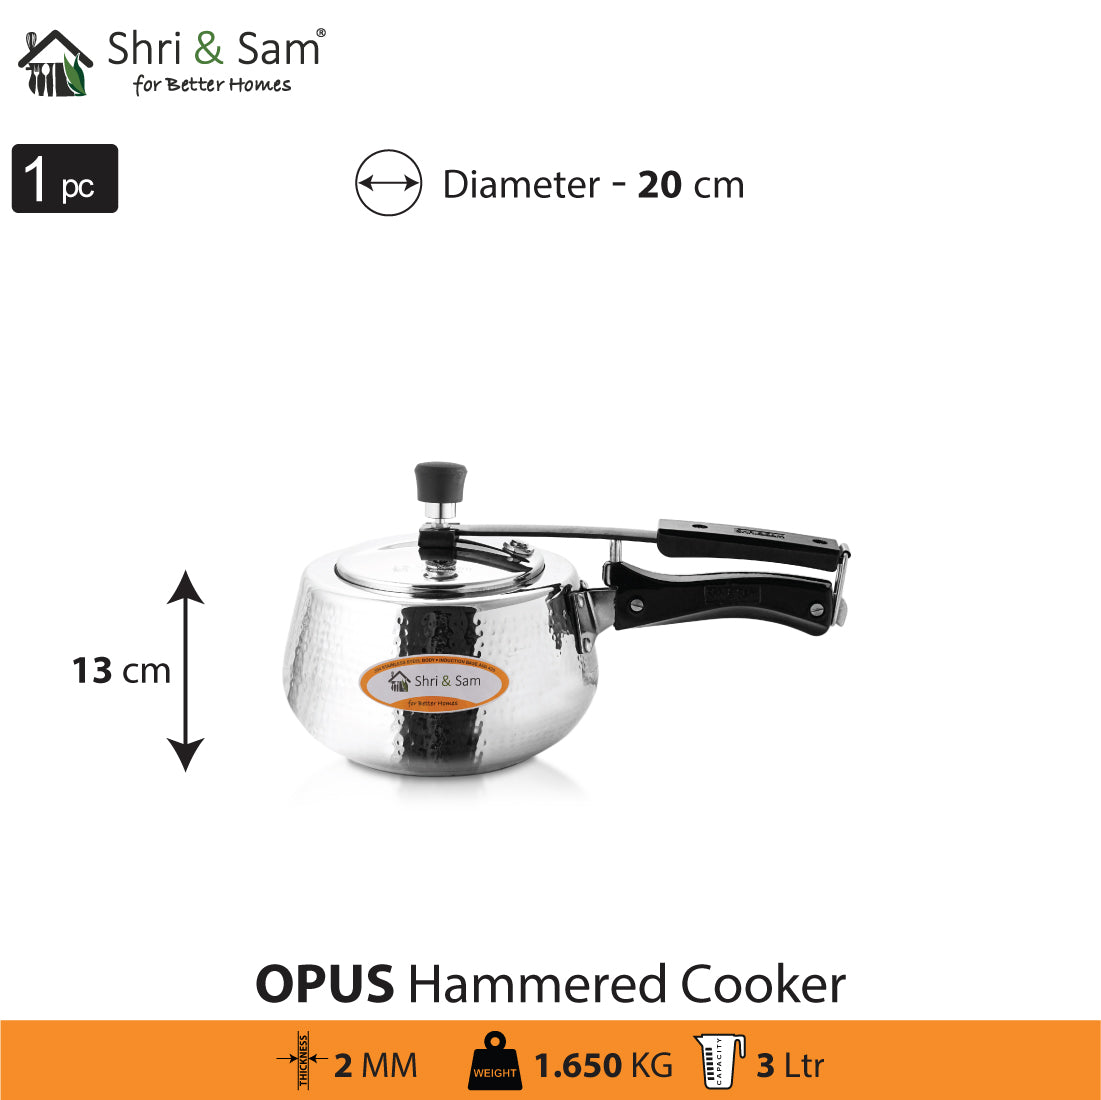 Stainless Steel Hammered Cooker Opus